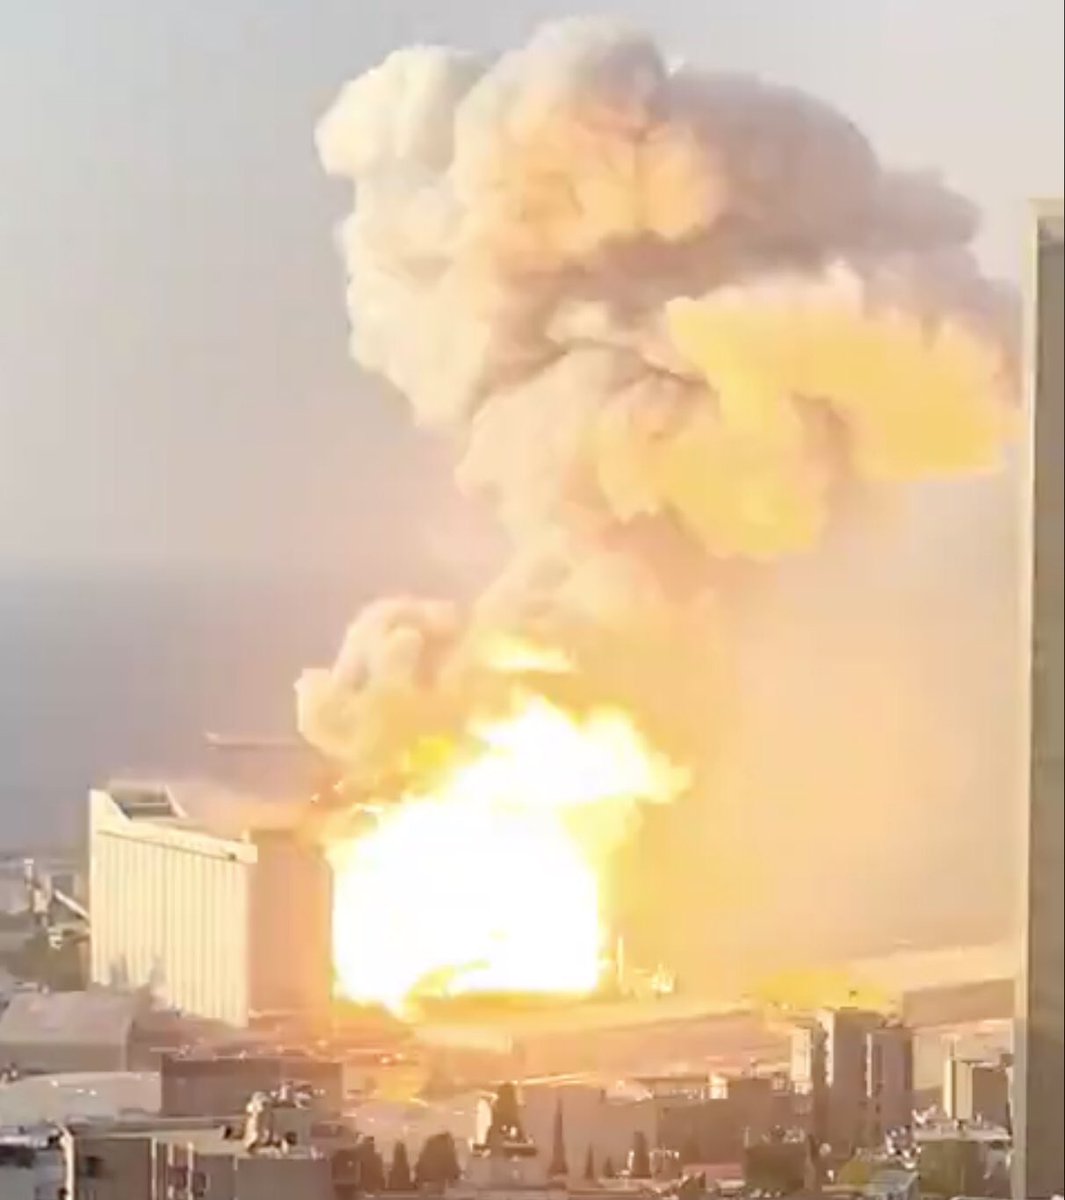 so if we pause at the moment of the explosion we can get a better look at the flashpointit does appear to be away from the silos, or at least in front of itwe don’t know the amount of grain dust in the air, or the relative humidity A dust explosion requires very dry stuff